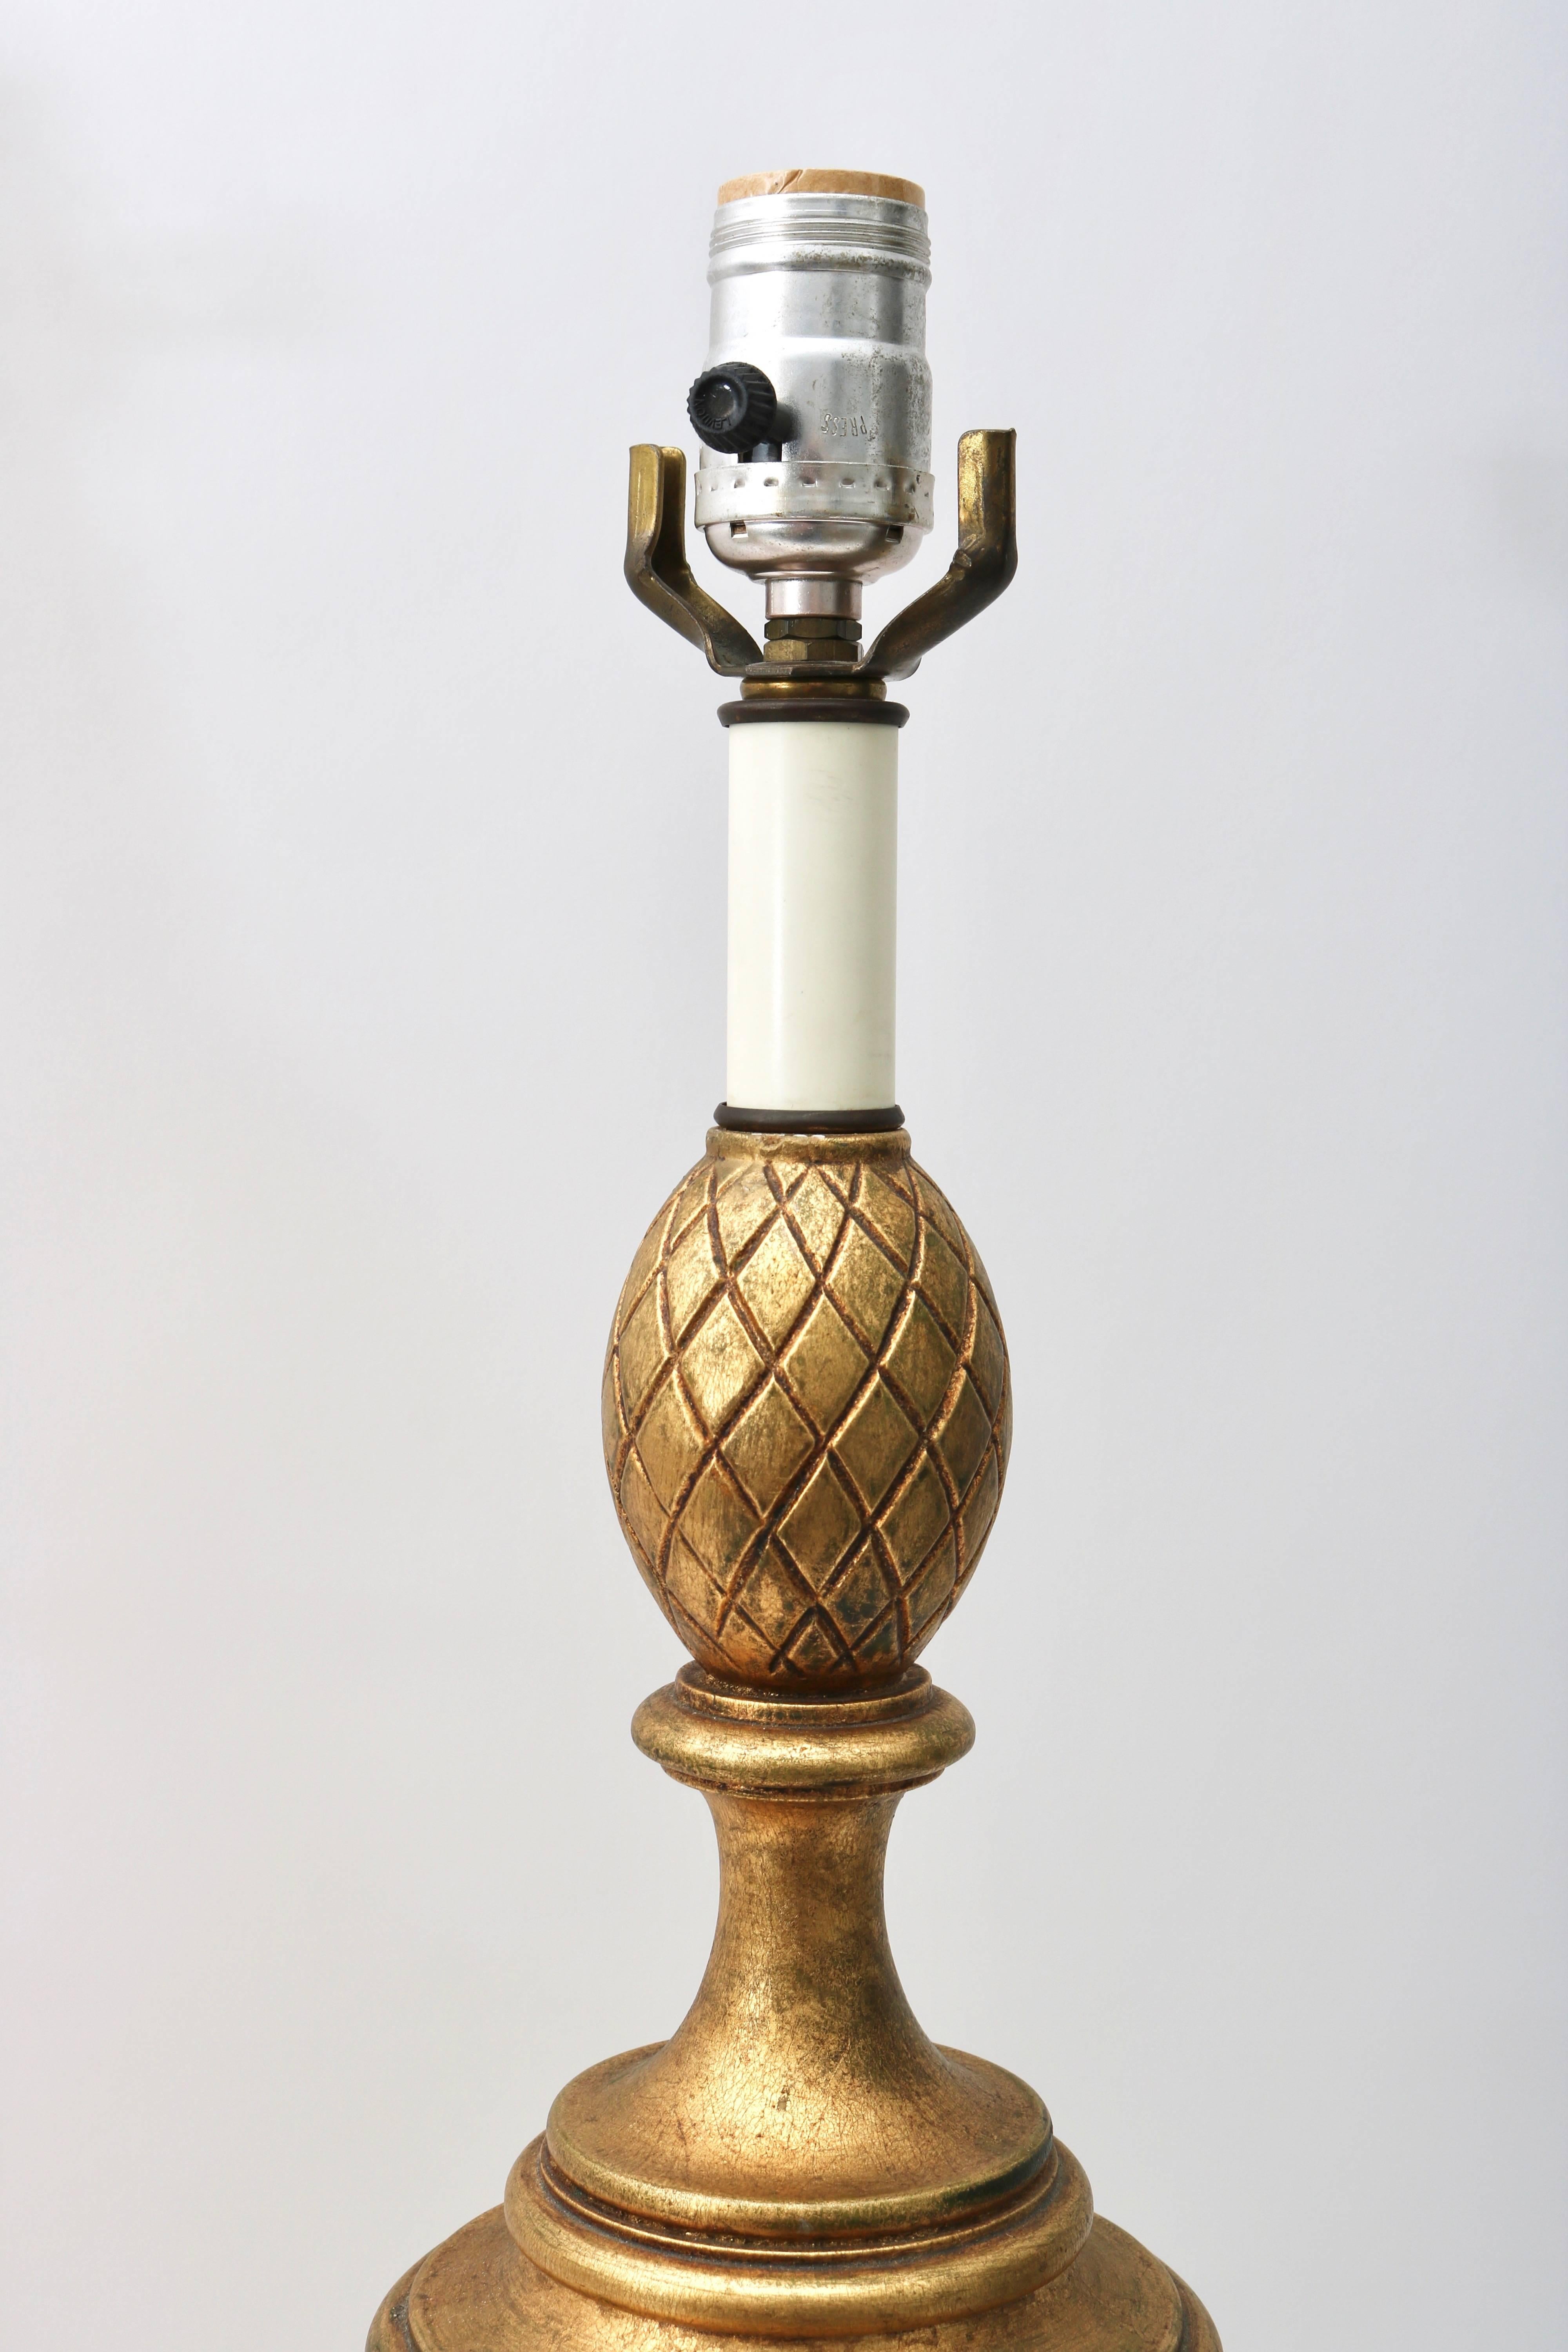 20th Century Pair of Louis XVI Style Urn-Form Table Lamps in a Bright, Antique Gold Finish